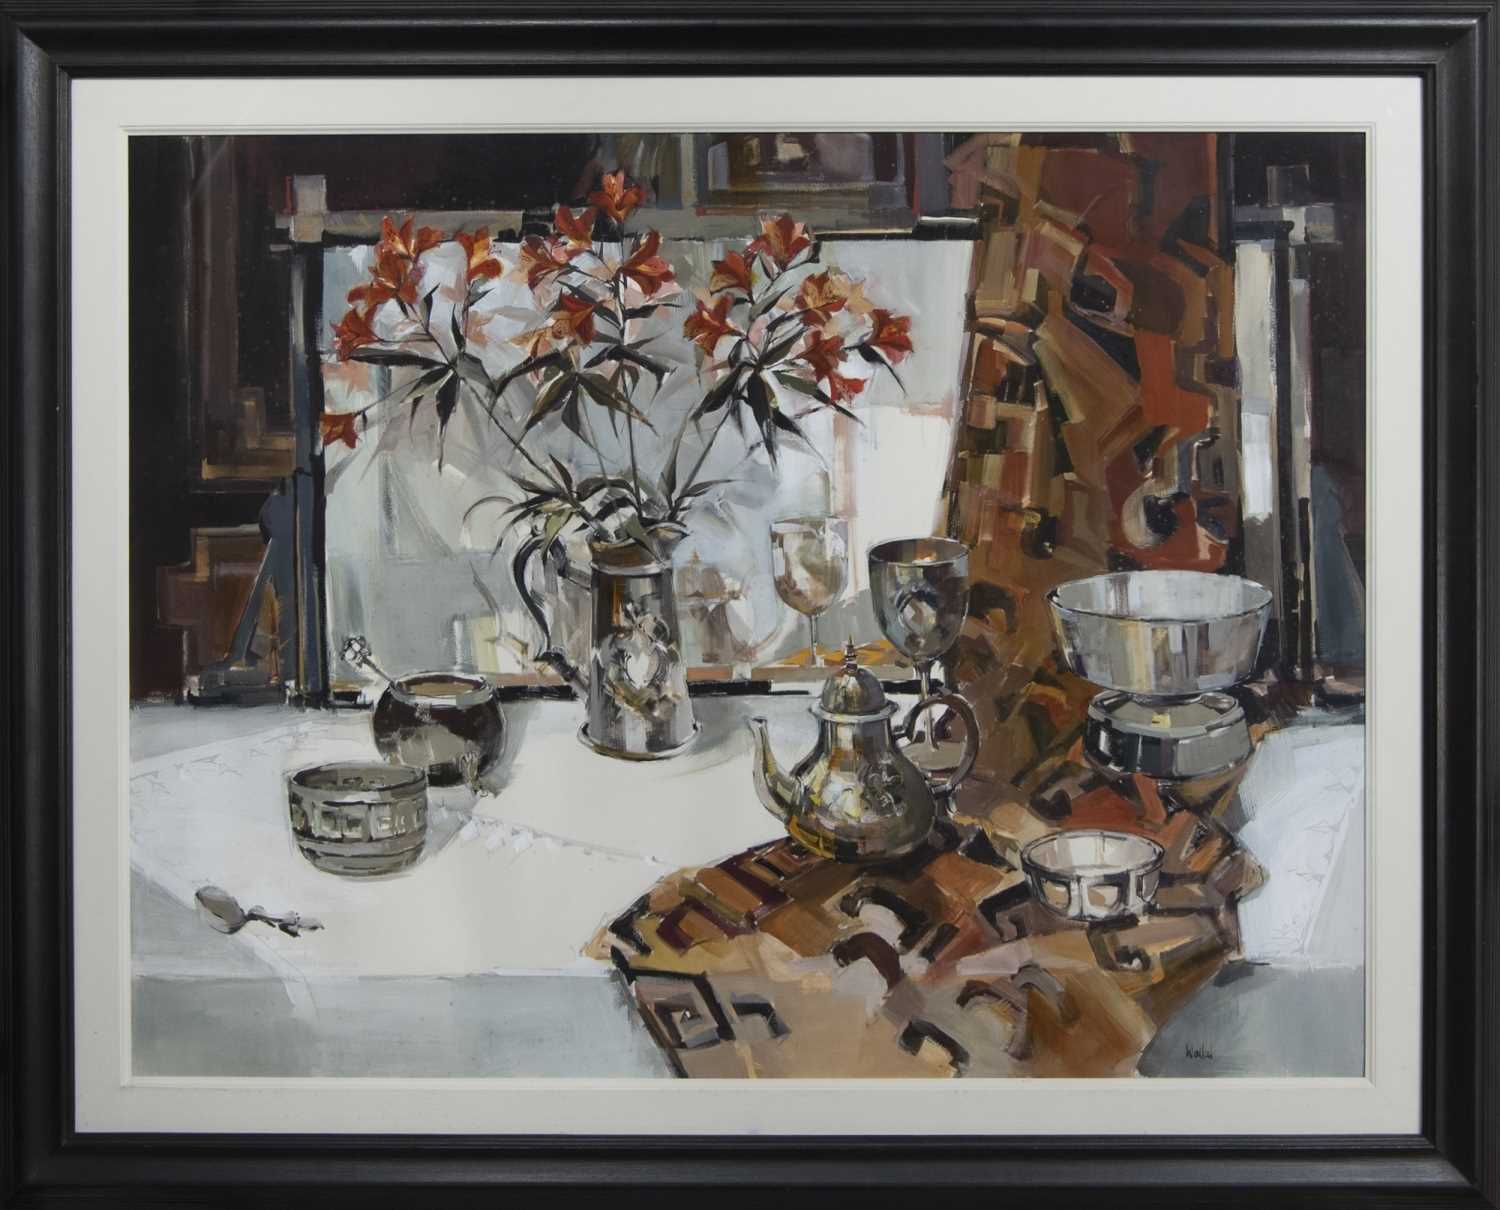 Lot 652 - THE SILVER TABLE, A LARGE MIXED MEDIA BY ETHEL WALKER